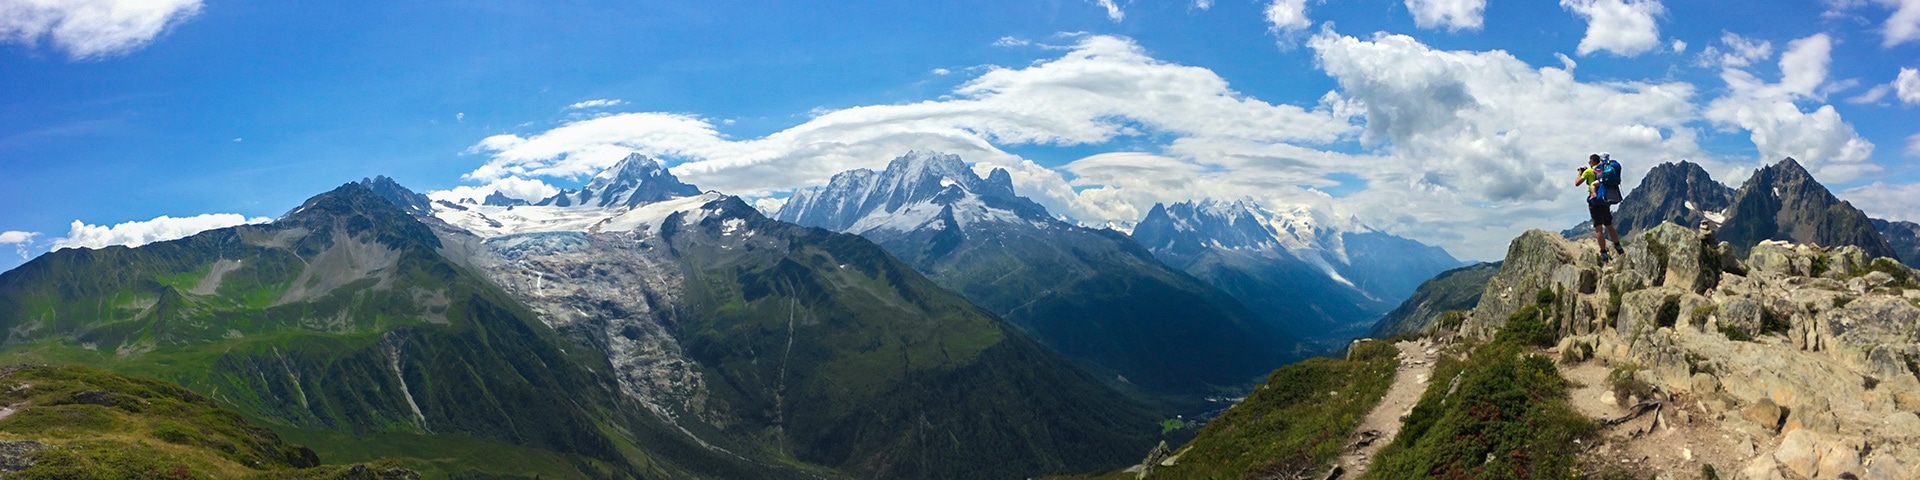 Best hikes from Chamonix, France